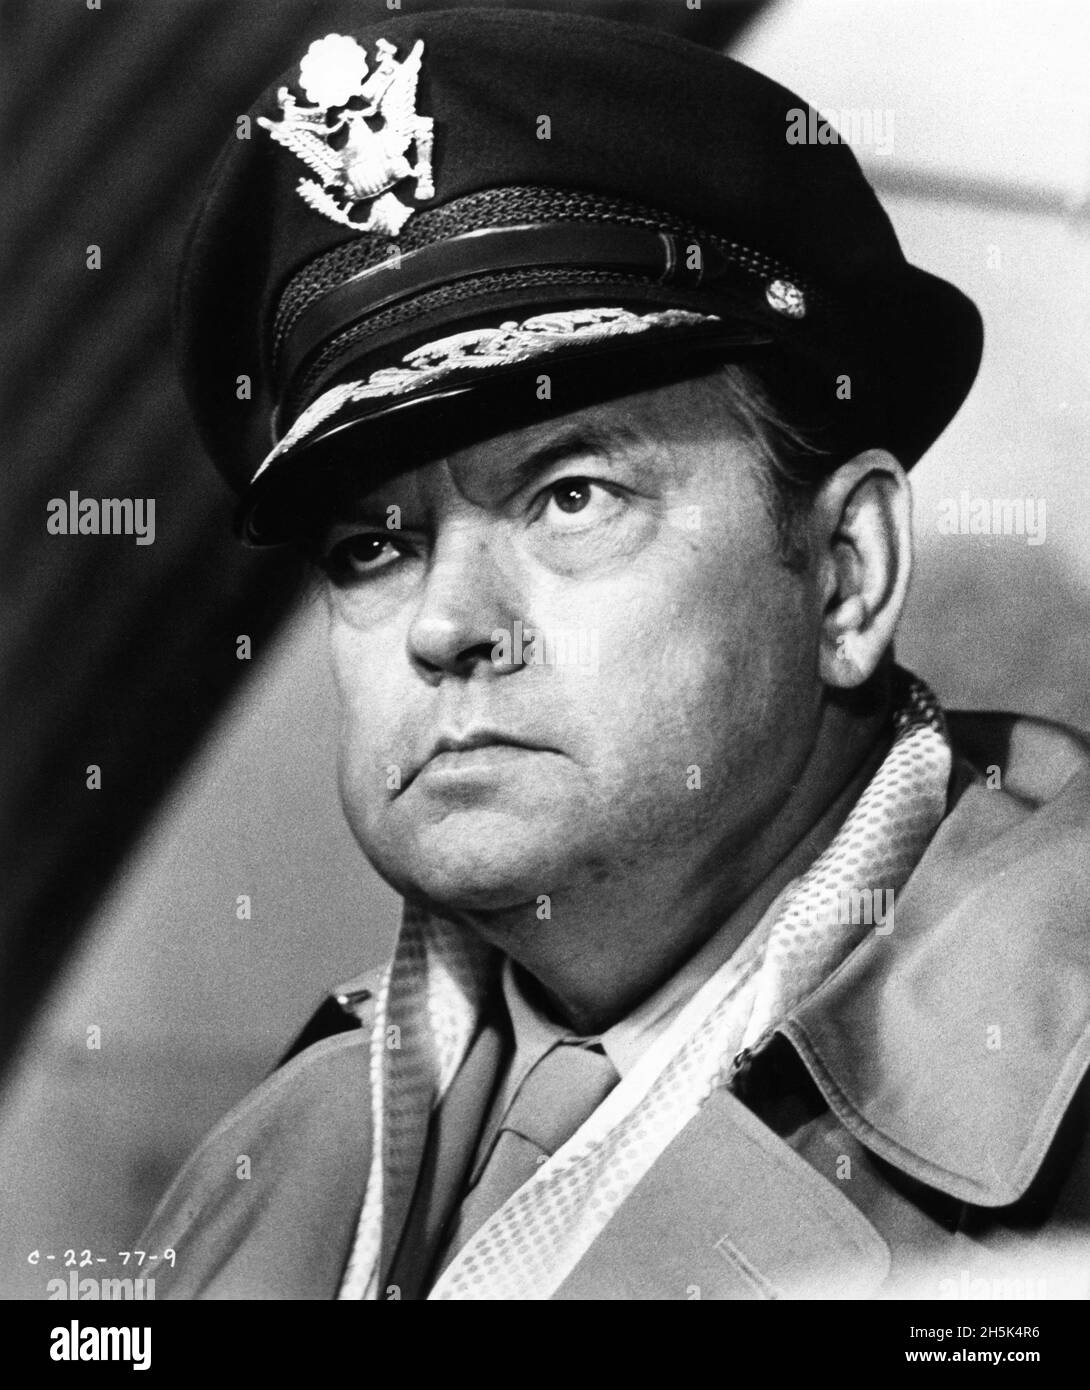 ORSON WELLES Portrait as General Dreedle in CATCH-22 1970 director MIKE NICHOLS novel Joseph Heller screenplay Buck Henry Filmways Productions / Paramount Pictures Stock Photo